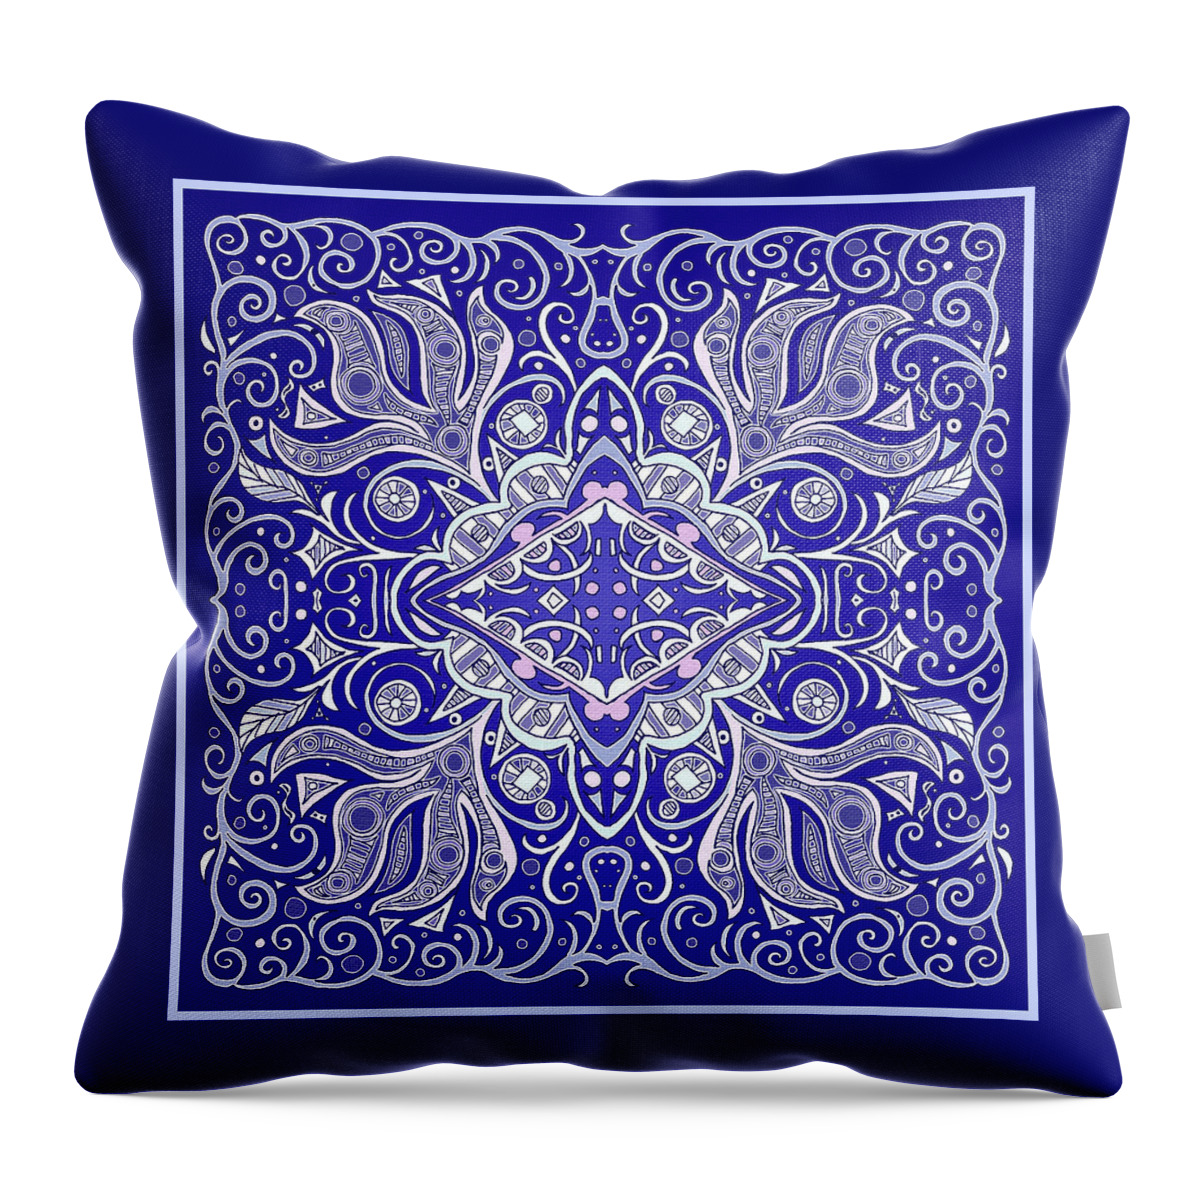 The Blue Period Throw Pillow featuring the mixed media Navy, White and Pink Square Design with Ornate Border by Lise Winne